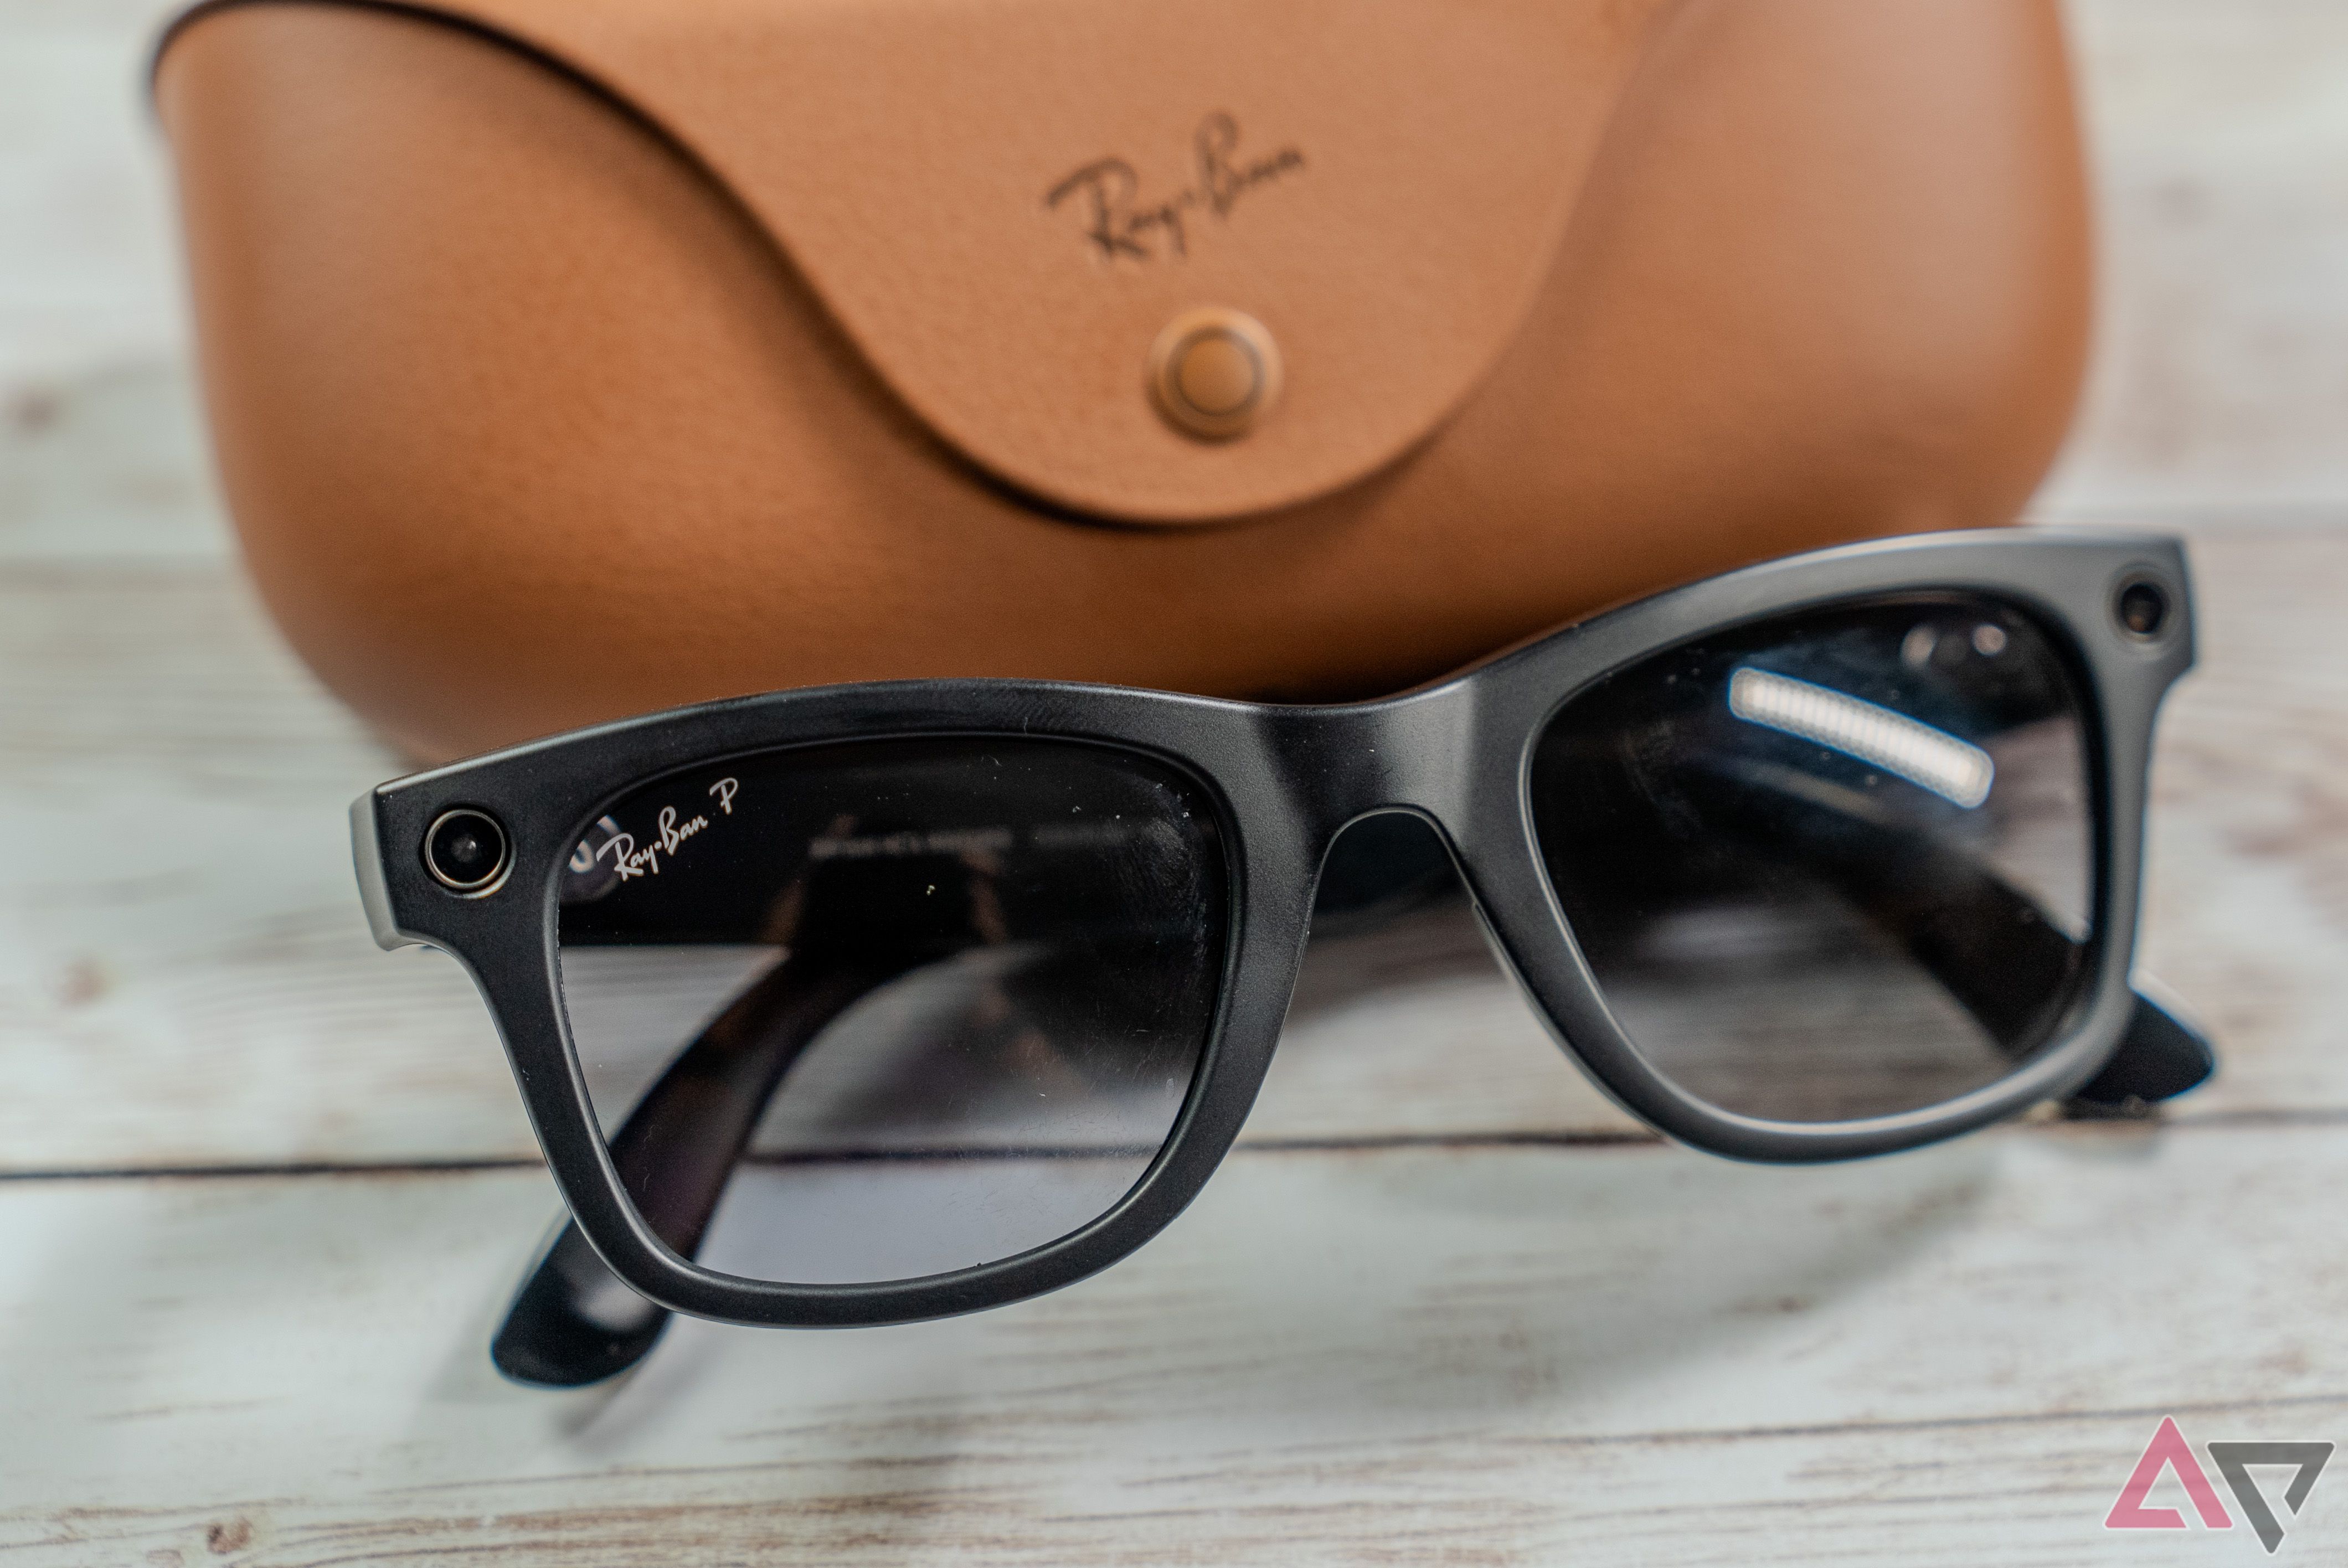 Ray-Ban Meta Smart Glasses Overview - How they work and compare to